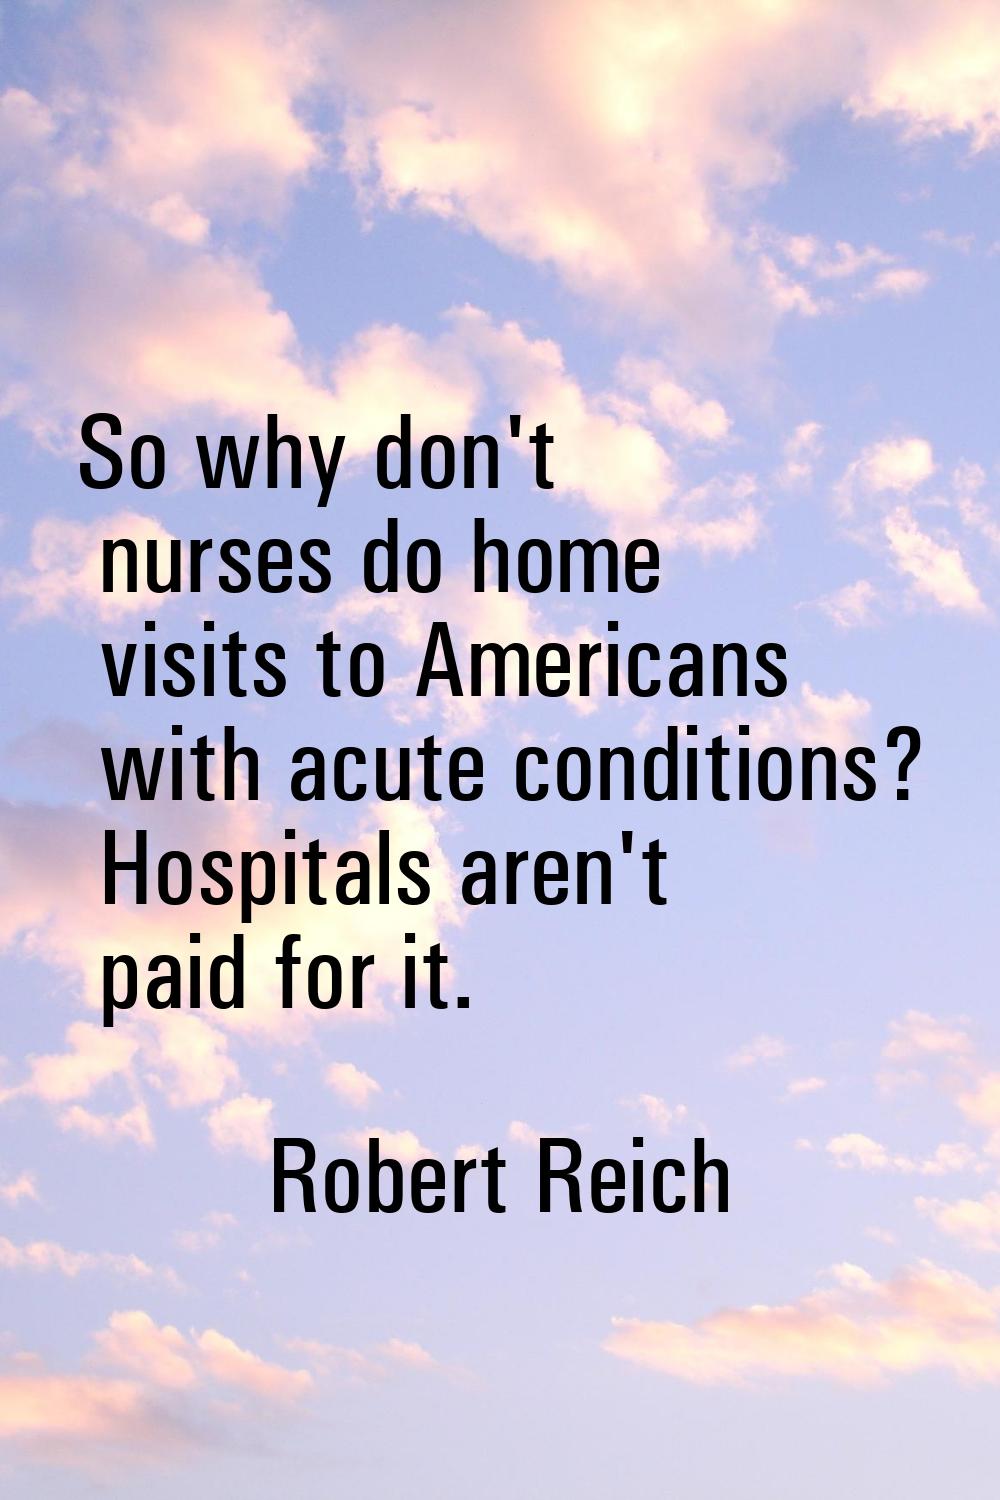 So why don't nurses do home visits to Americans with acute conditions? Hospitals aren't paid for it